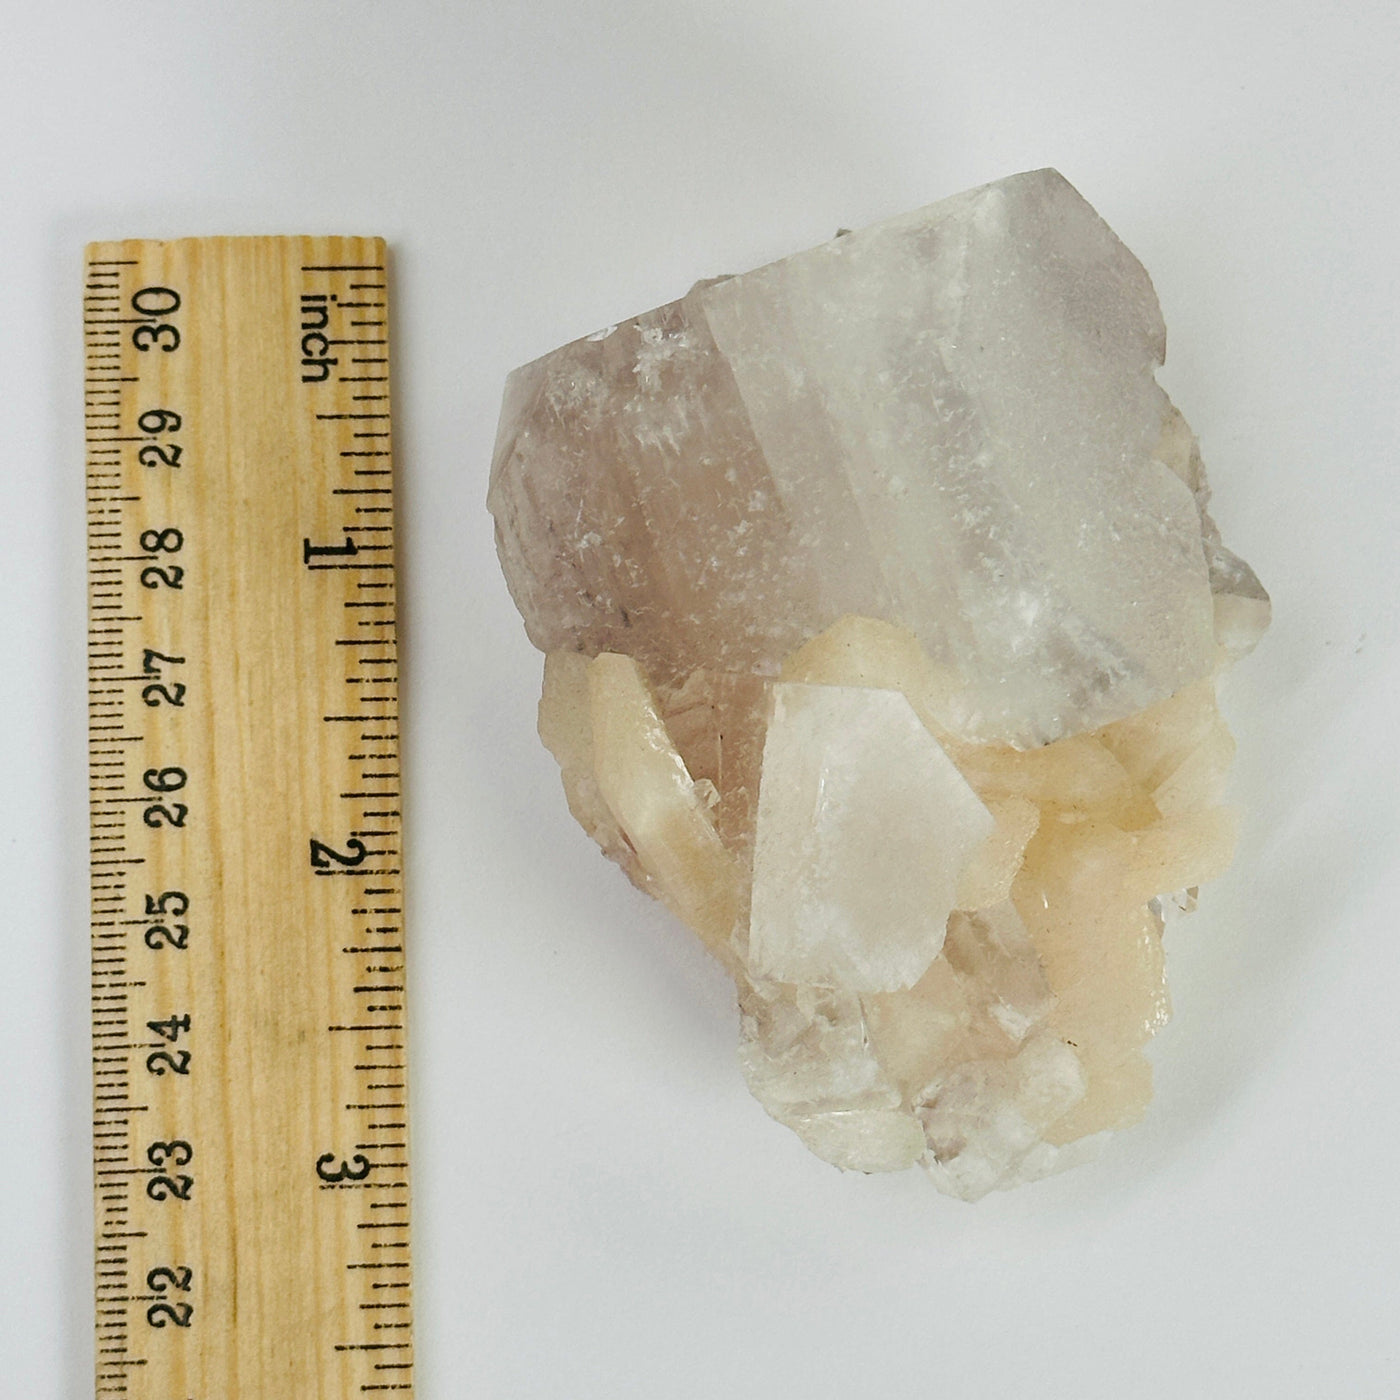 apophyllite next to a ruler for size reference